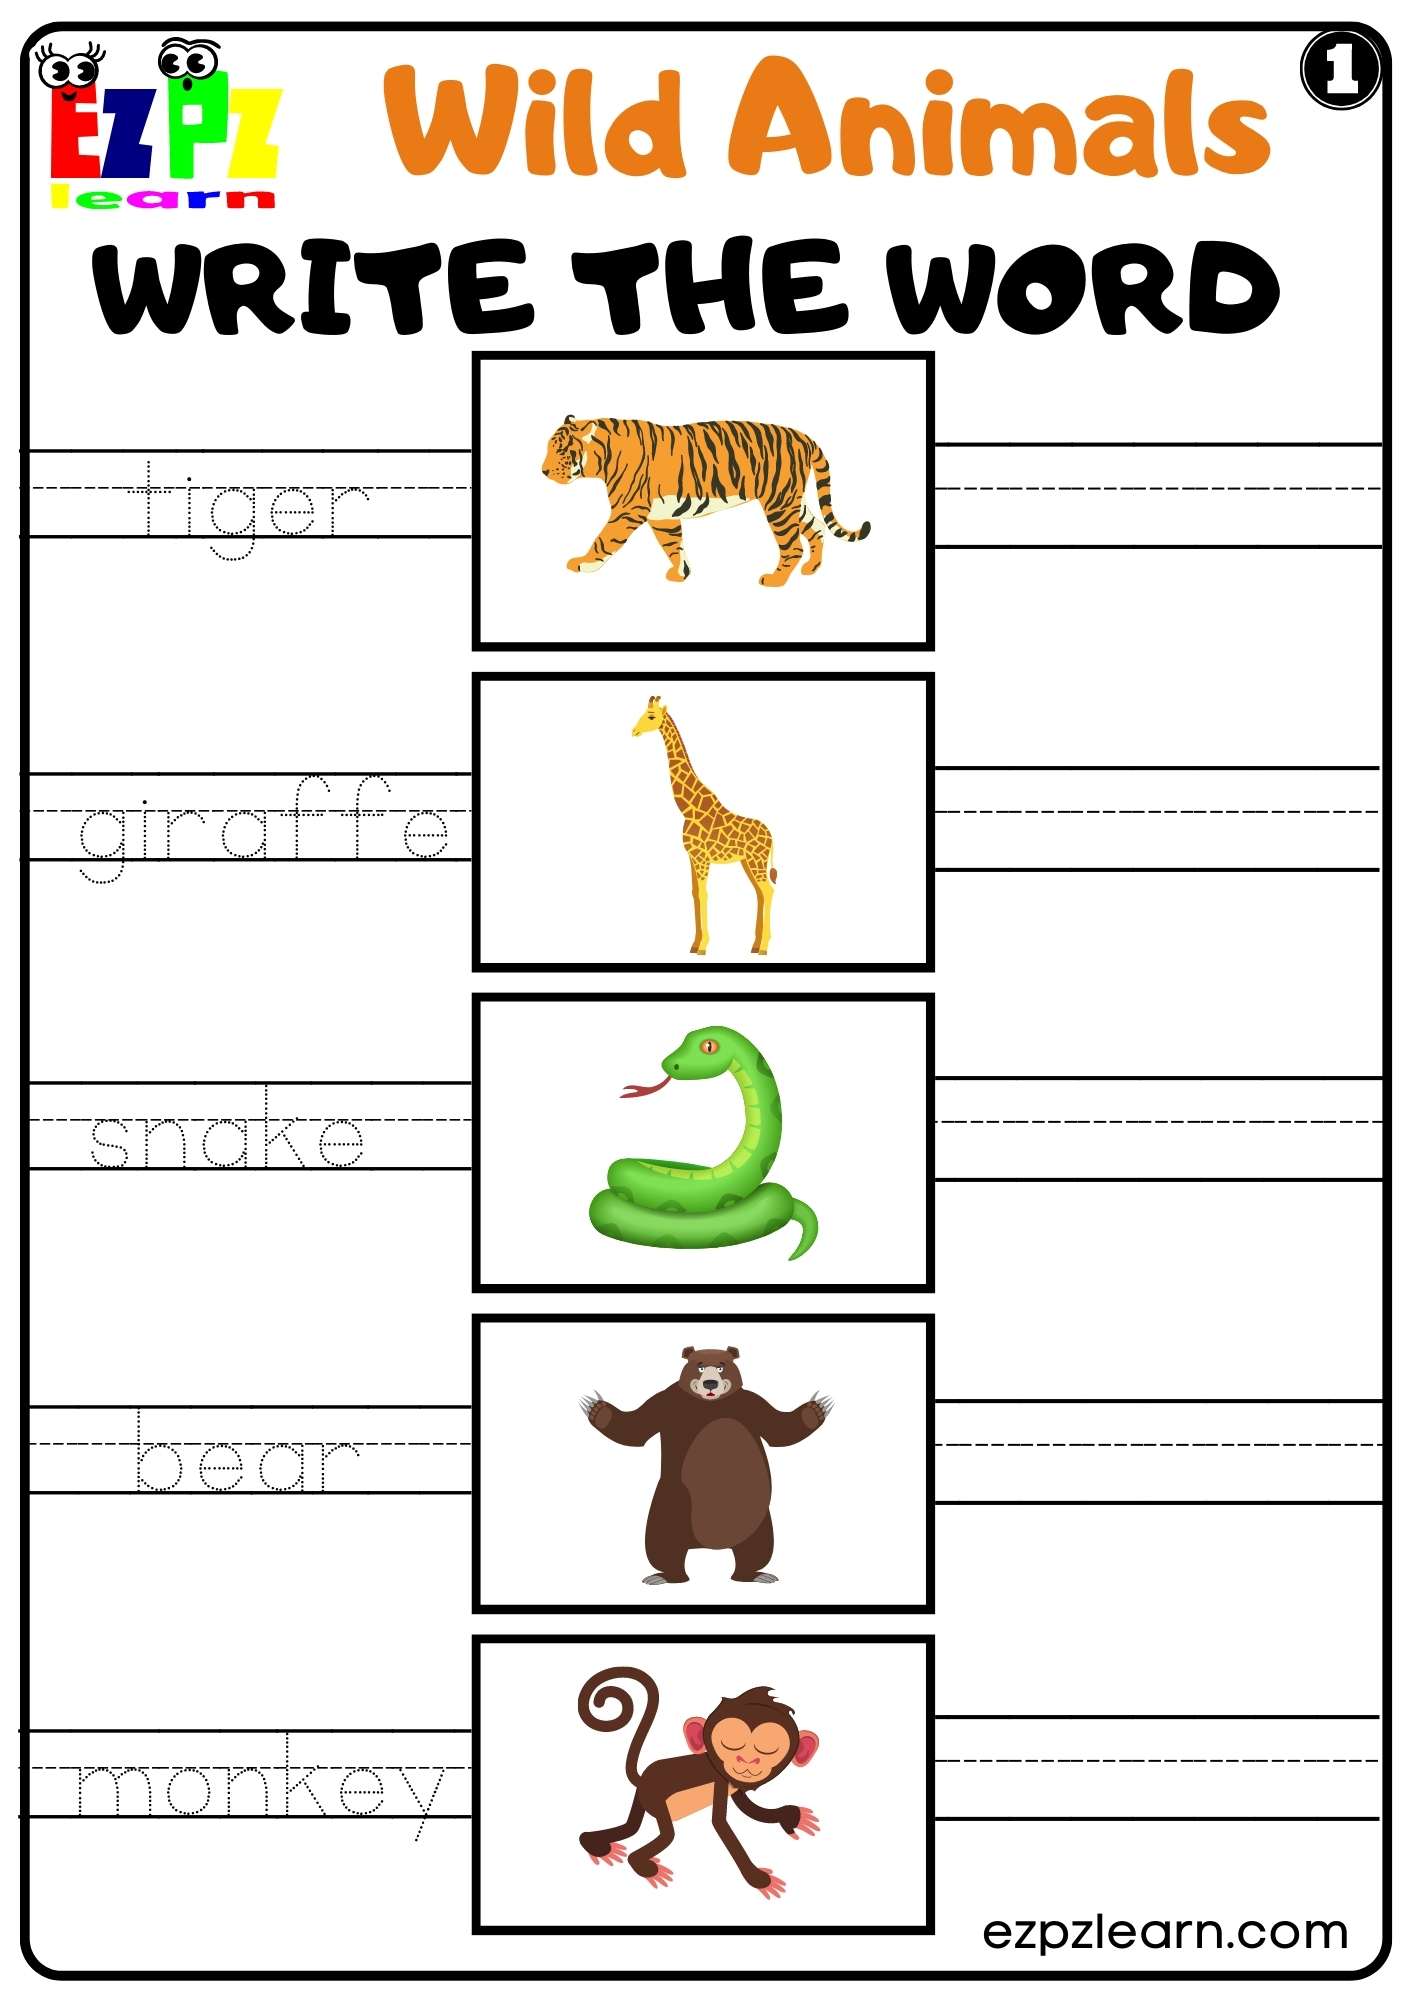 Wild Animals Write the Word Set 1 For kids and ESL PDF Download -  